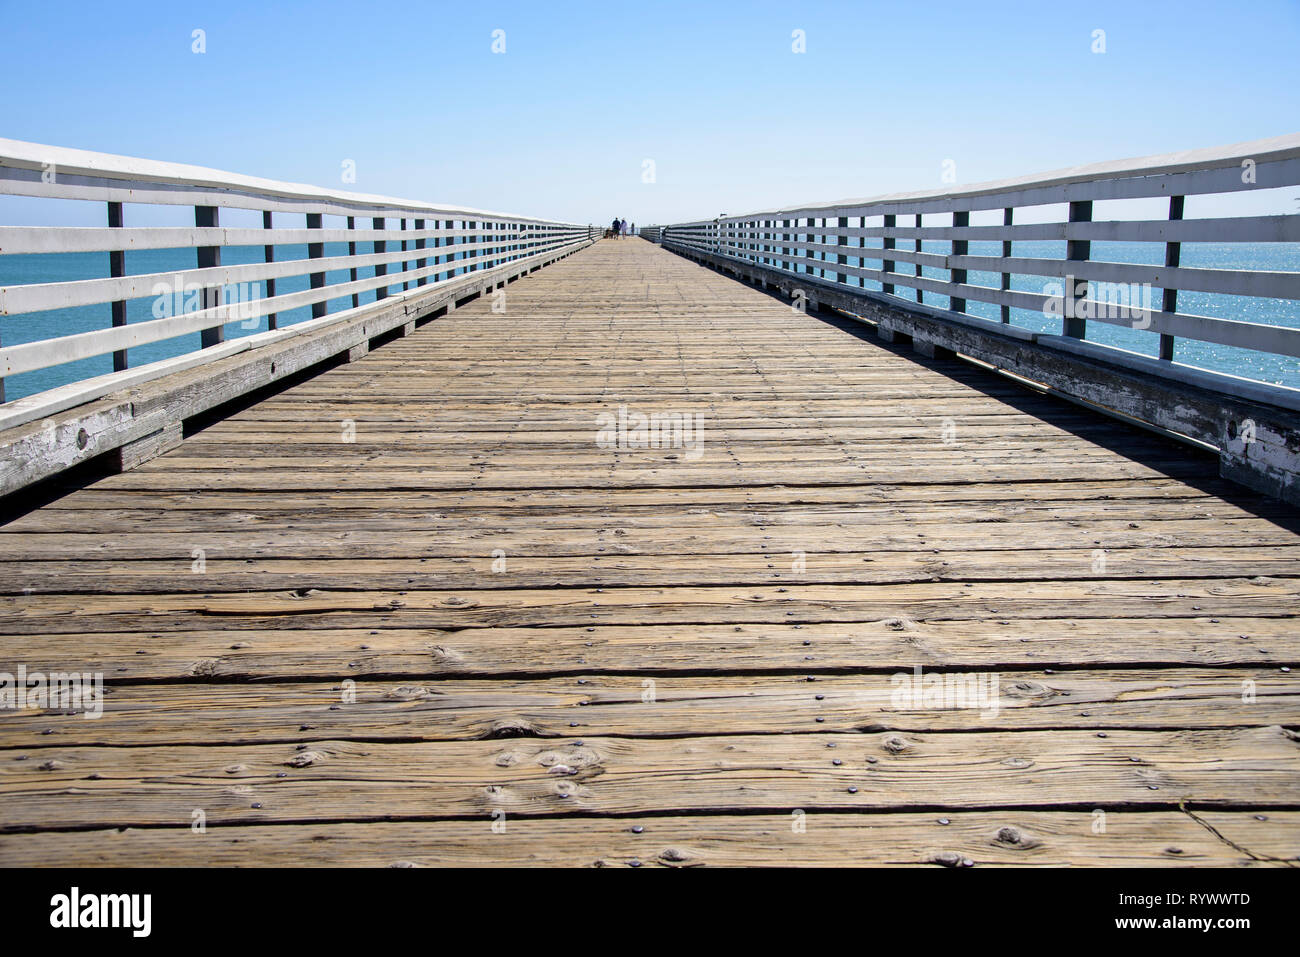 Pier with white guard rails under blue skies. Stock Photo